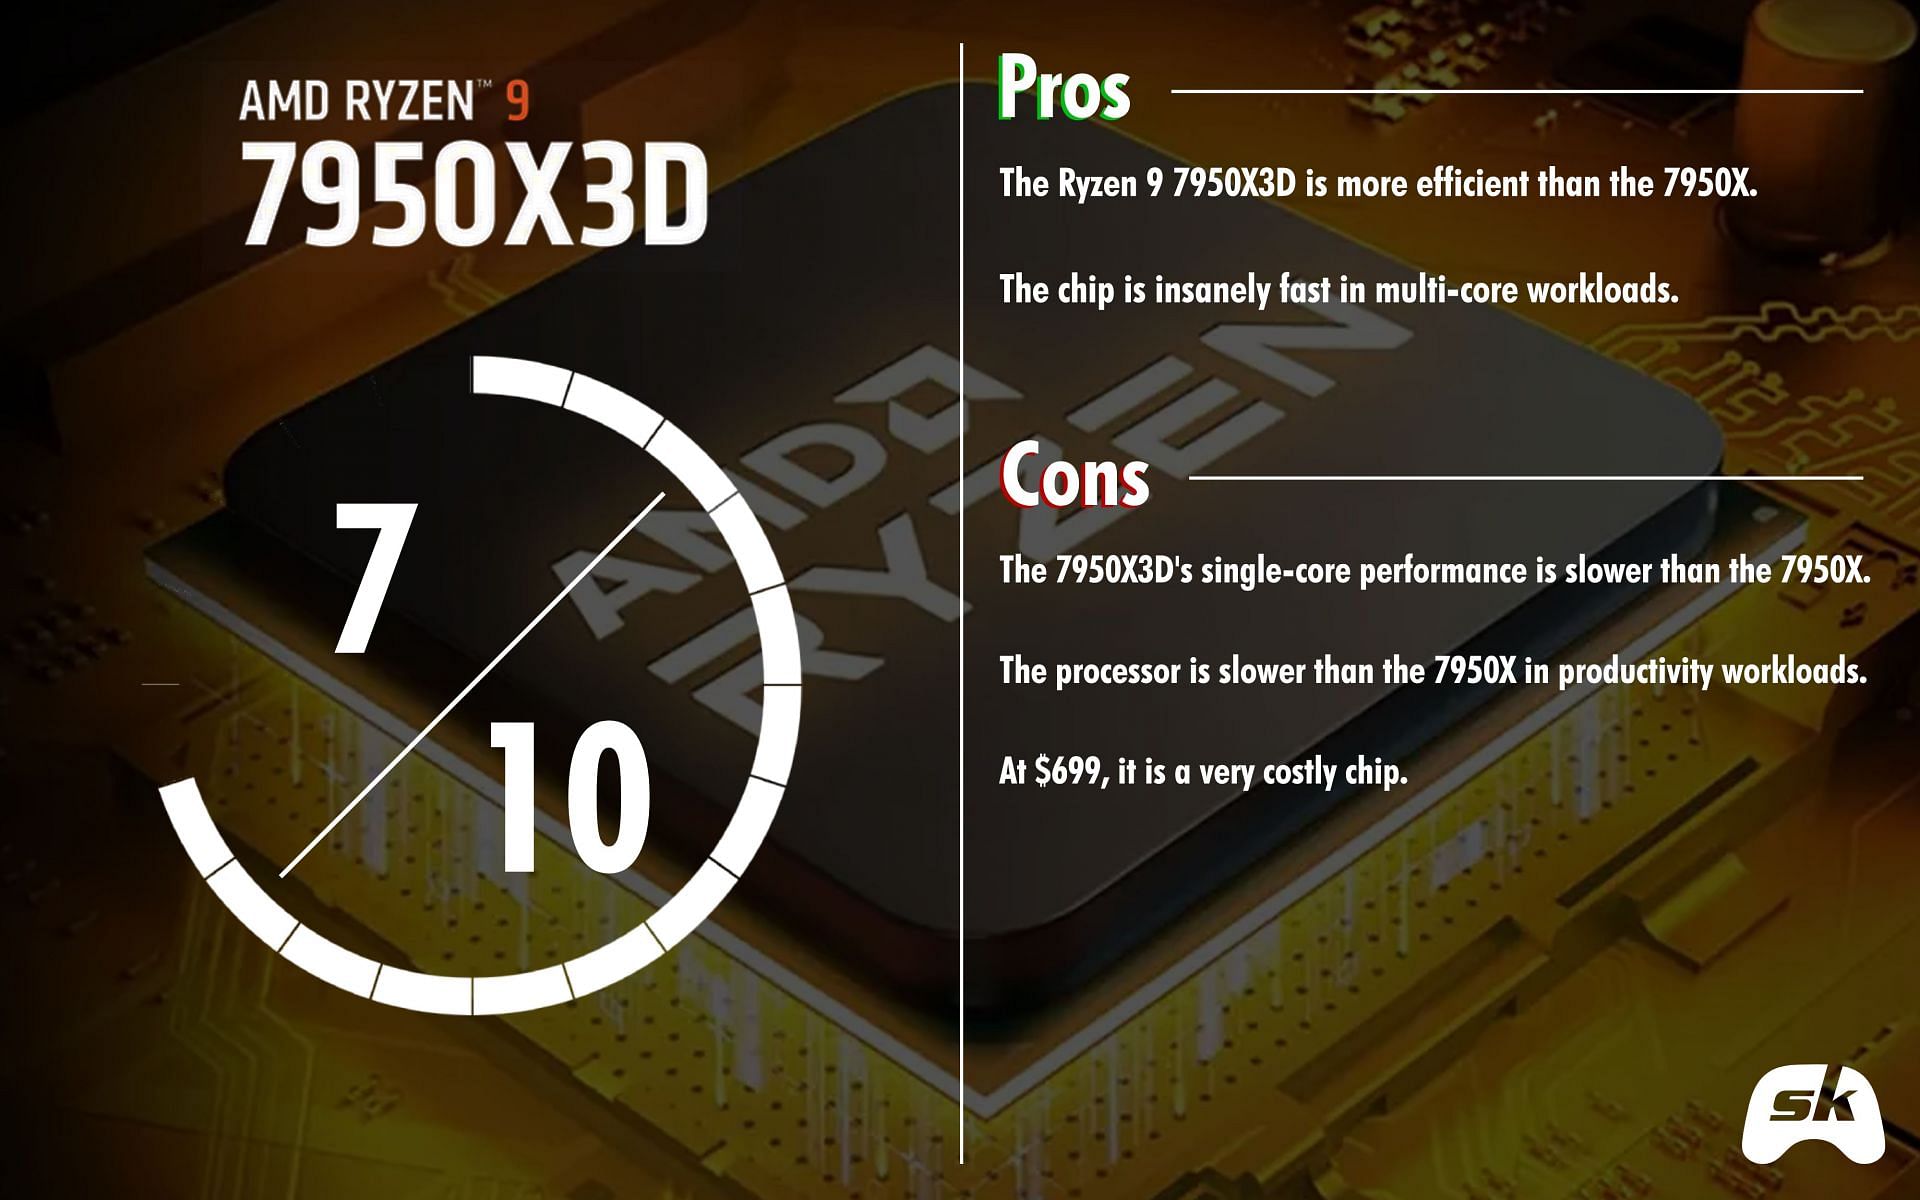 AMD Ryzen 9 7950X Reviews, Pros and Cons